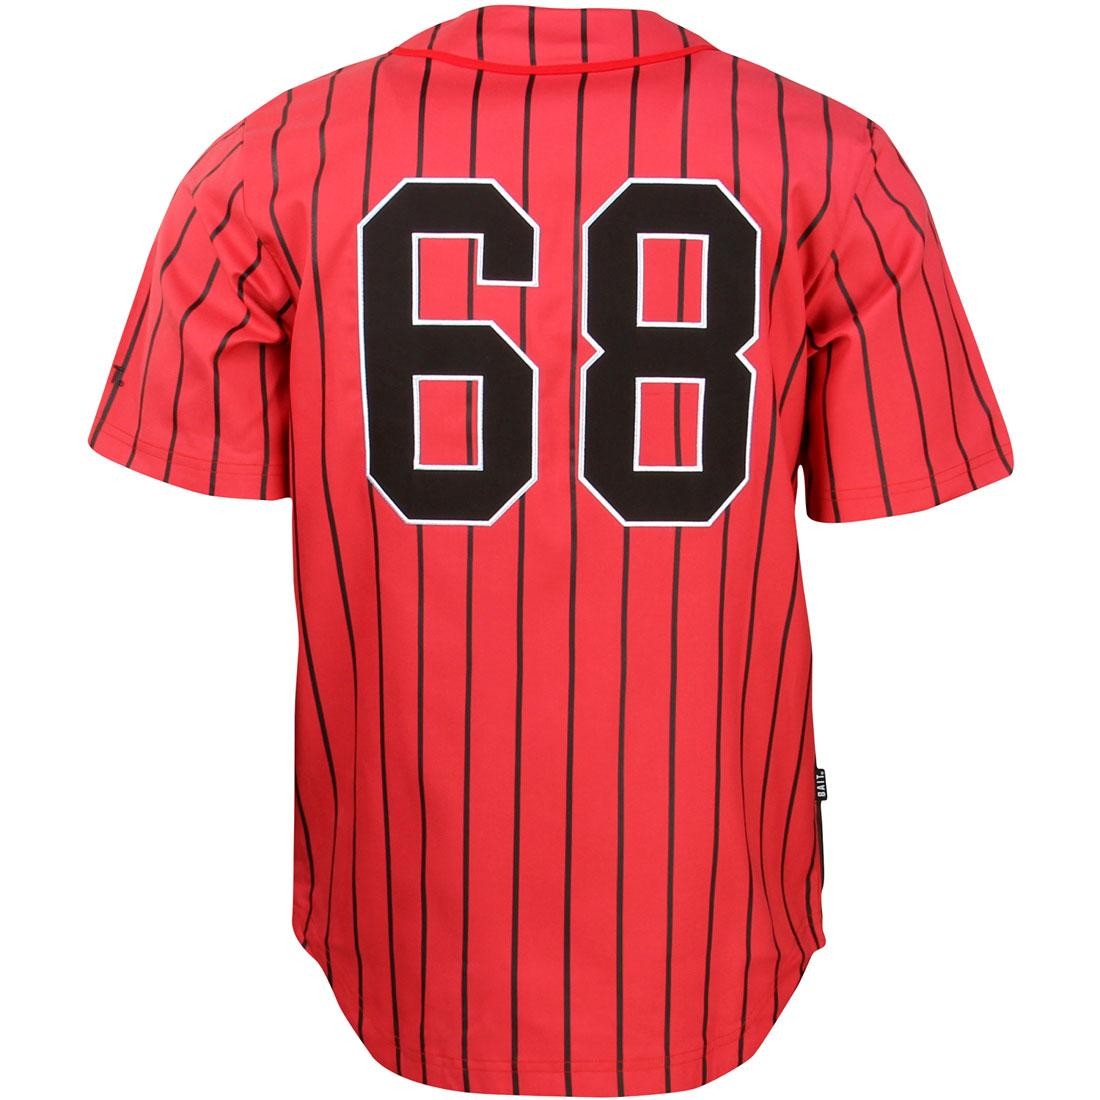 black and red astros jersey